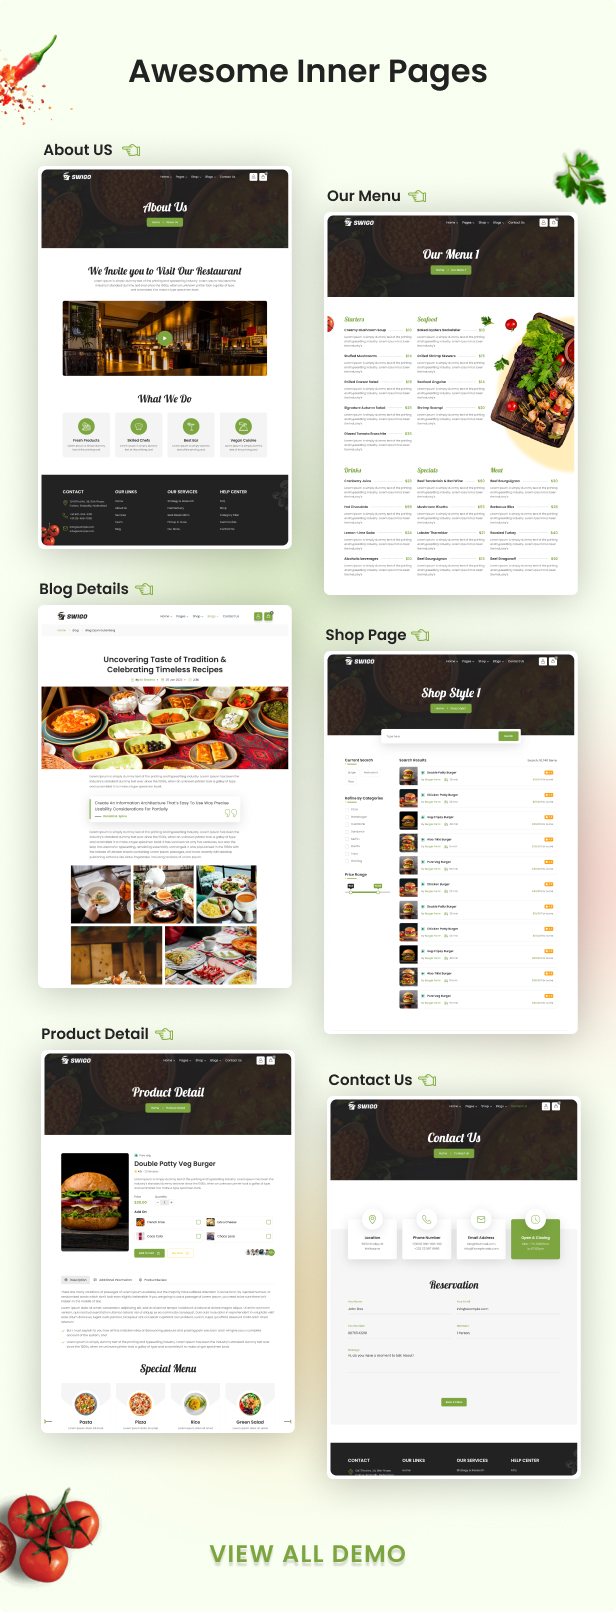 Swigo - Fast Food And Restaurant React Tailwind CSS Template